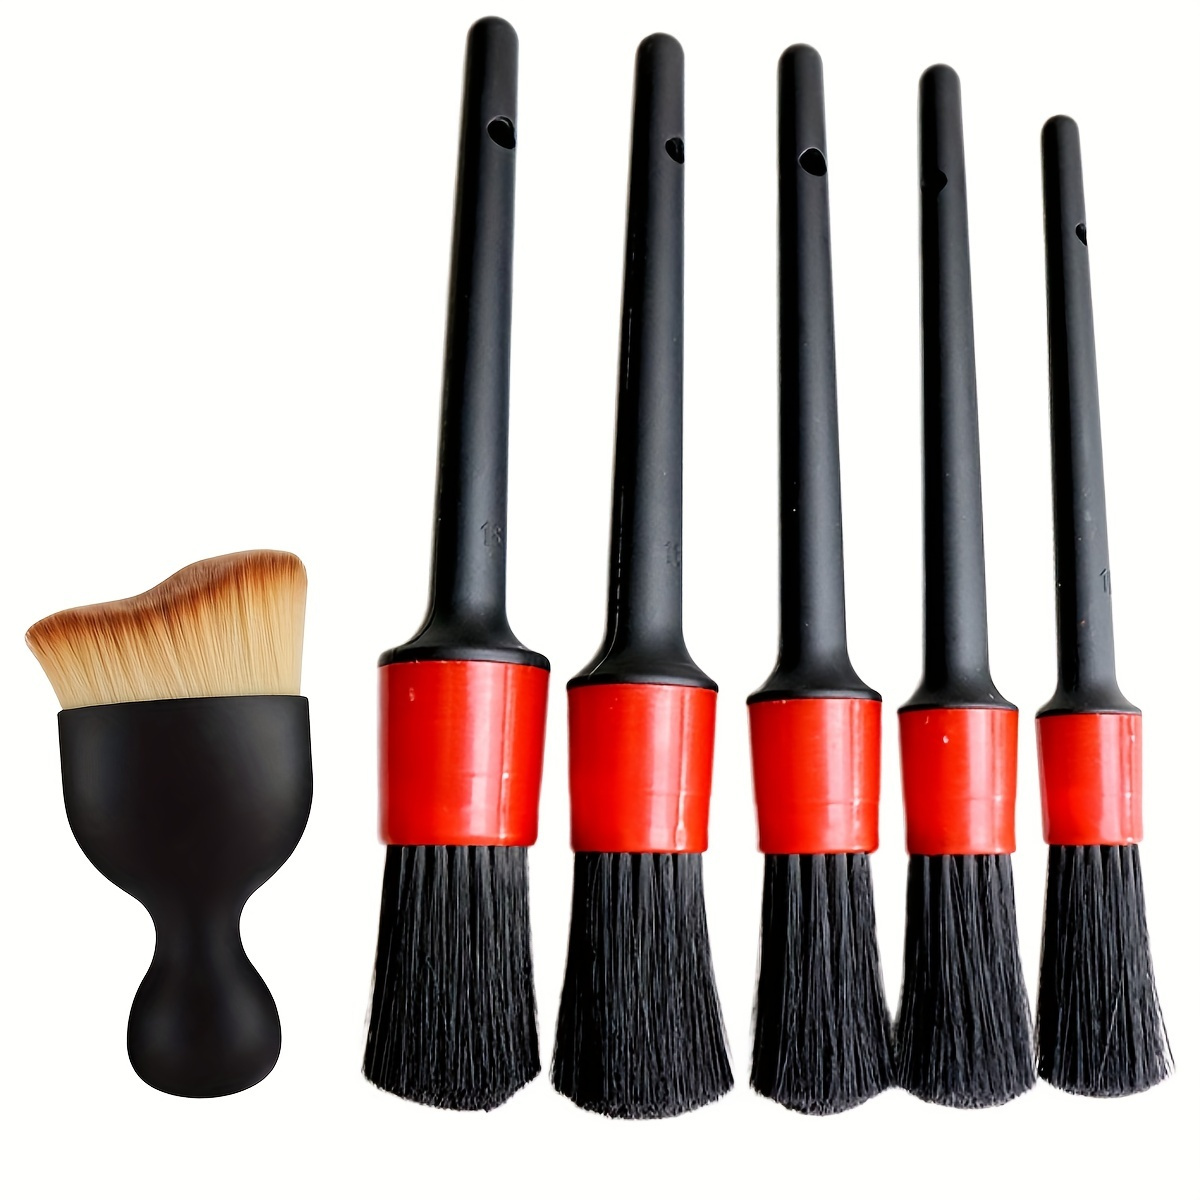 

6-piece Car Detailing Brush Set For Trucks & Cars - Durable Nylon, Ergonomic Design For Easy Use - Perfect For Wheels, Interior, Dashboard & Air Vent Cleaning